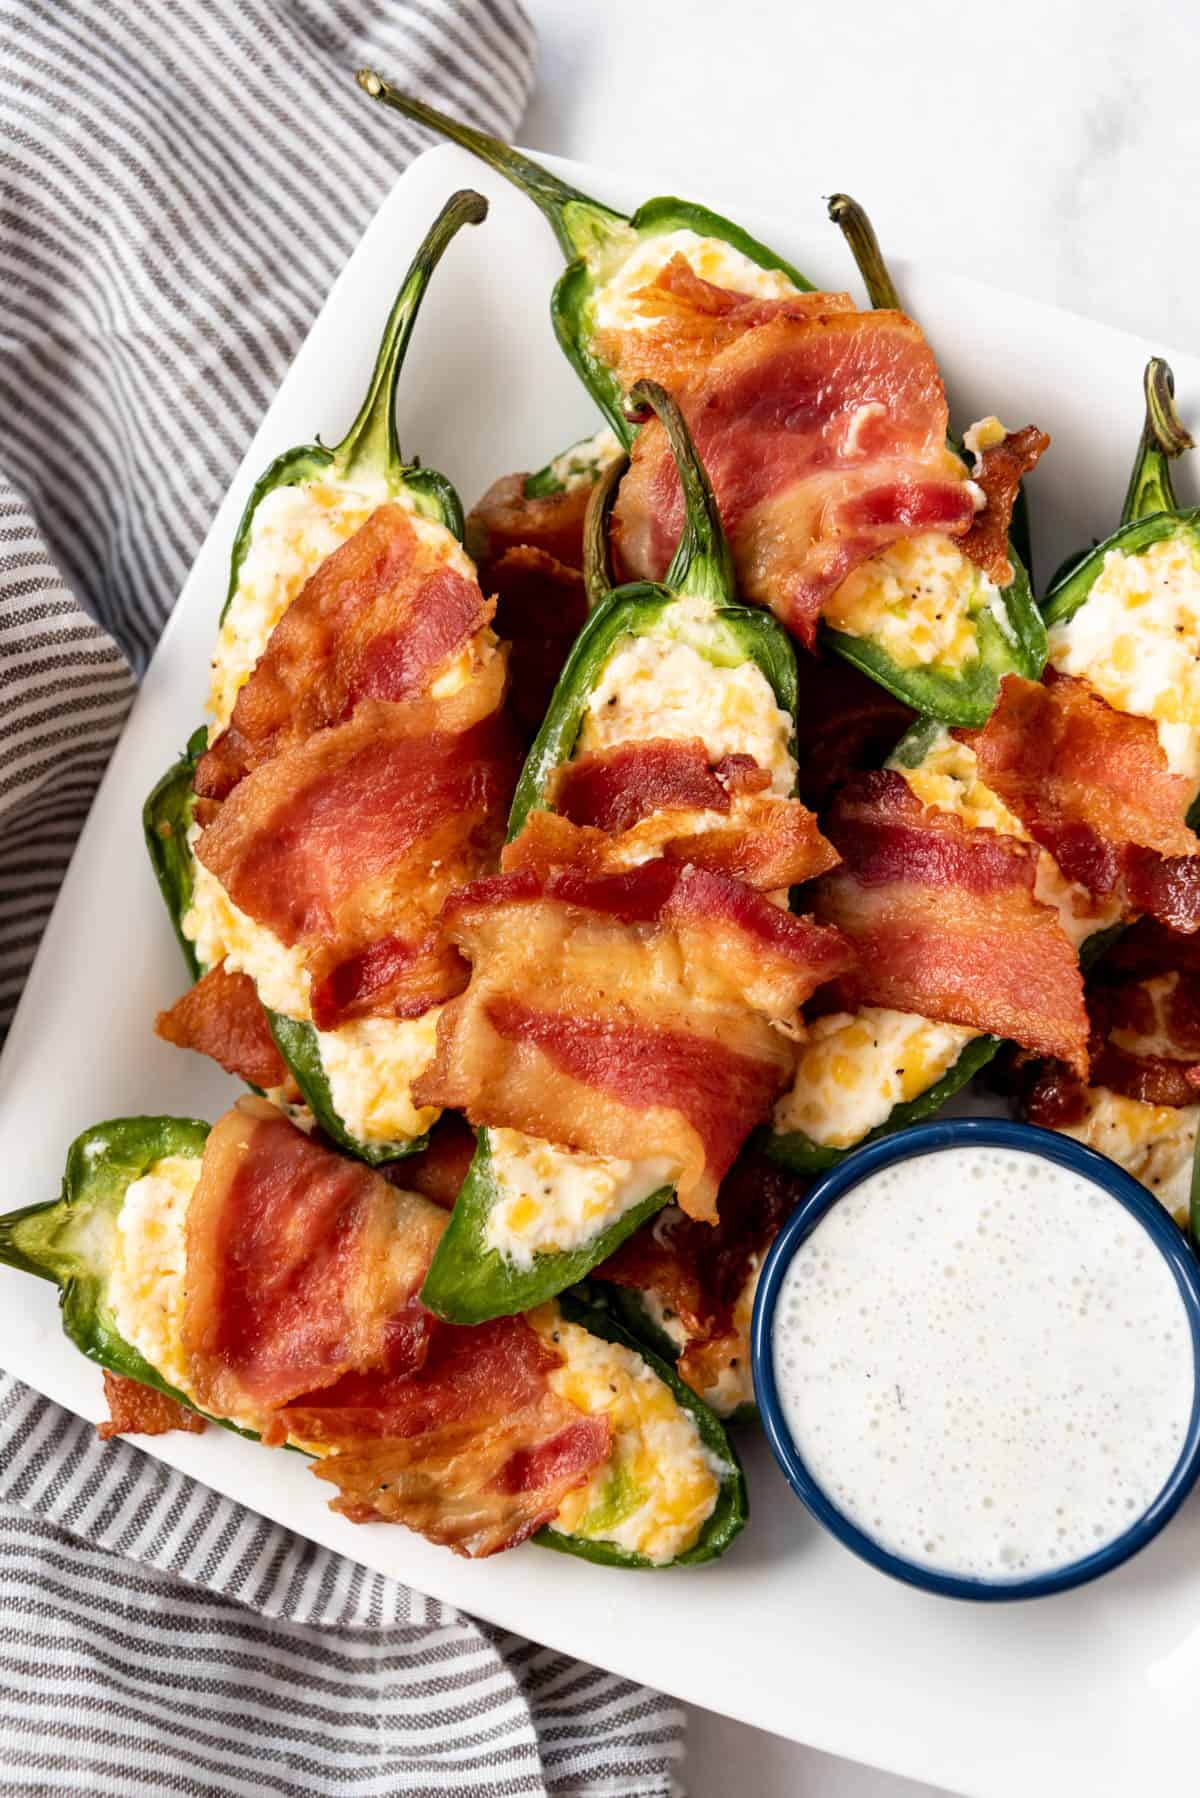 Homemade jalapeno poppers wrapped in bacon on a plate with ranch dressing on the side.